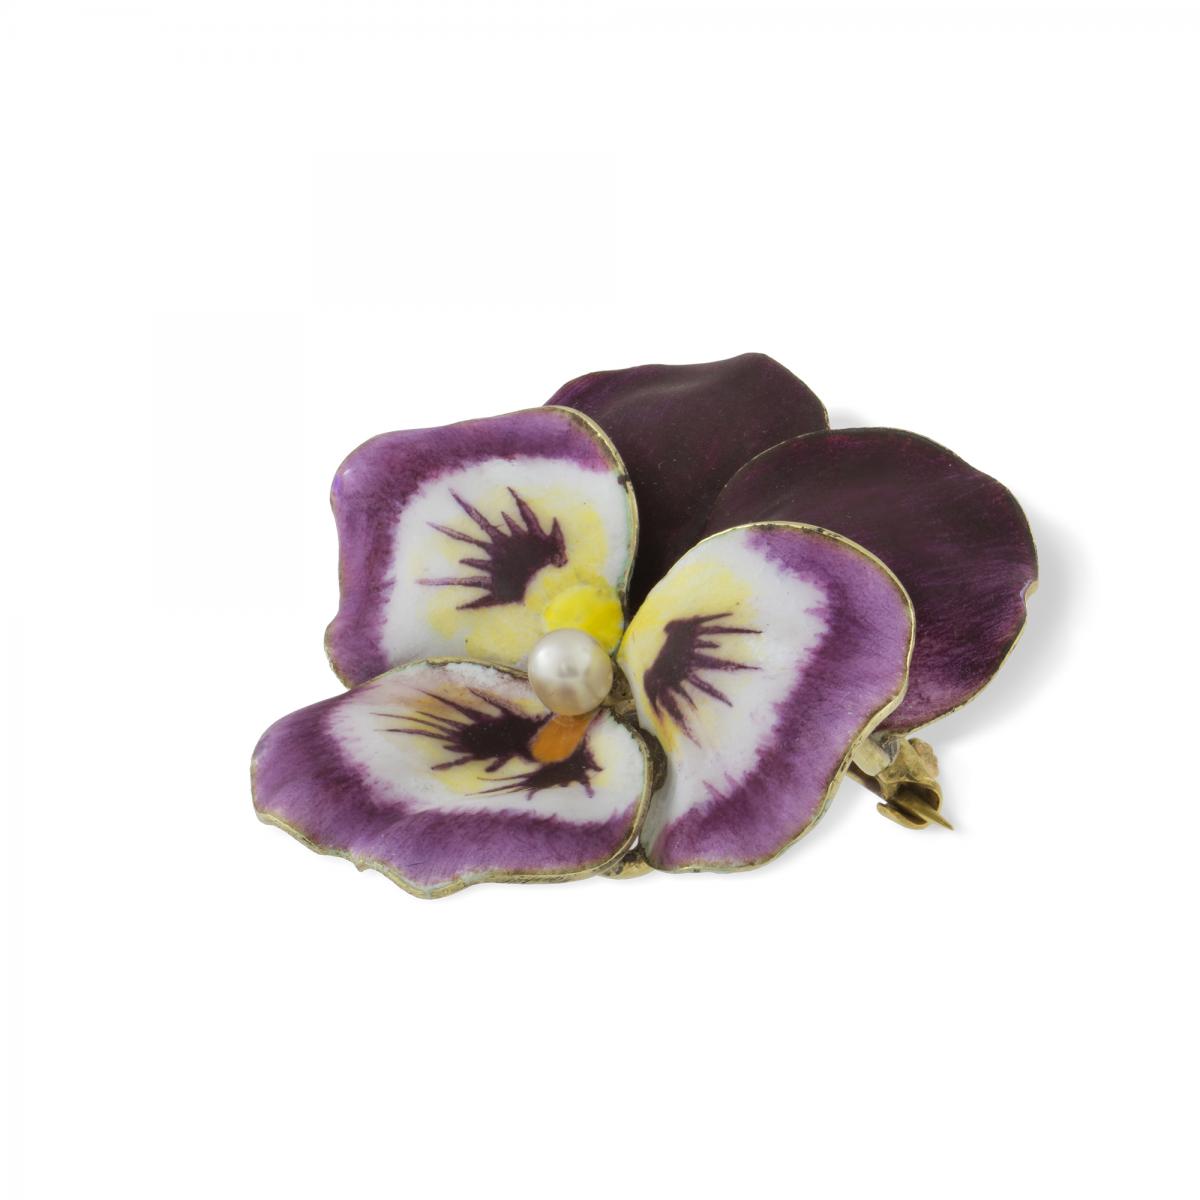 An Antique Enamel and Pearl Pansy Brooch, Circa 1900